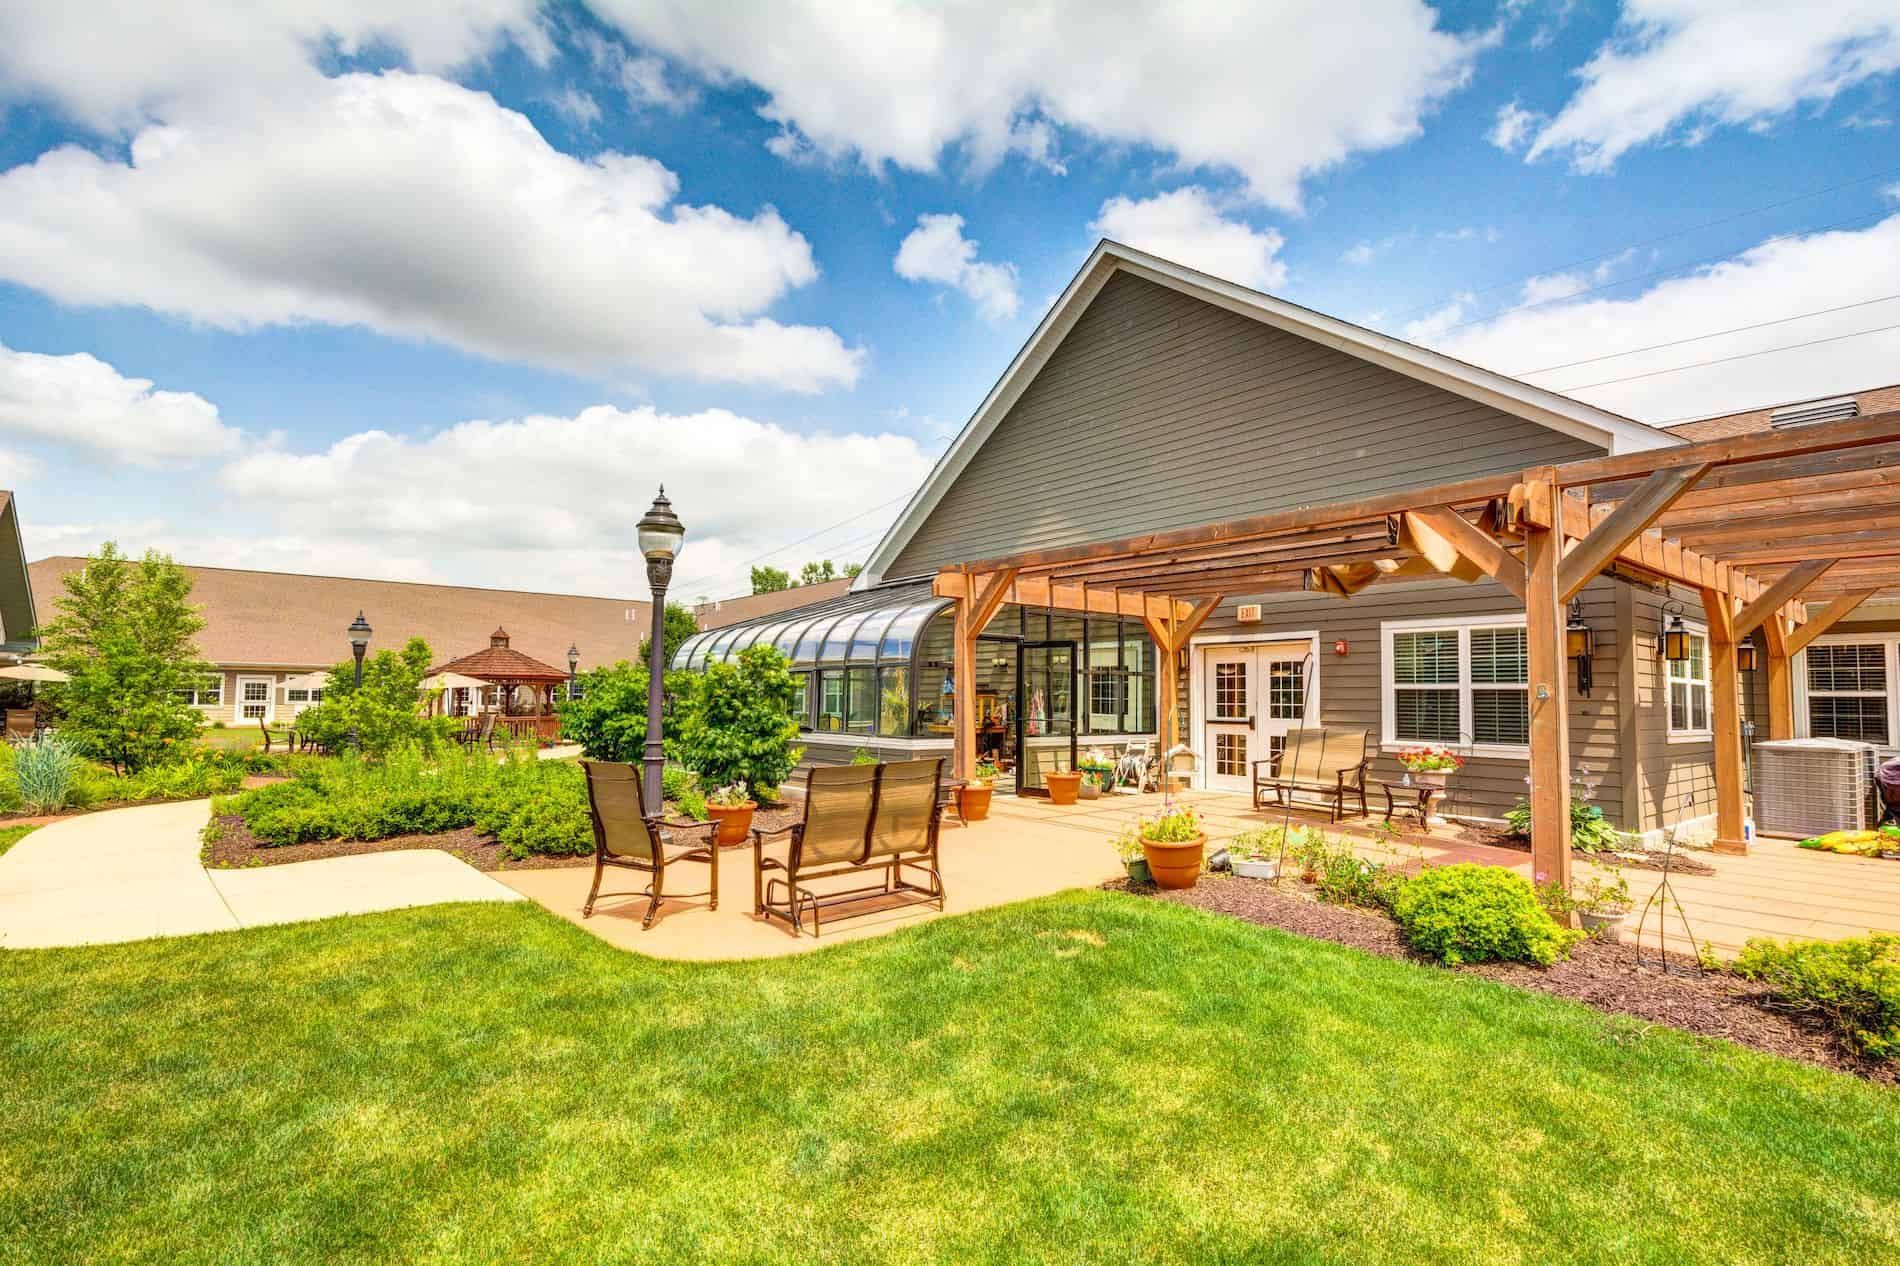 Senior living community, Auberge At Naperville, featuring elegant architecture and lush backyard.